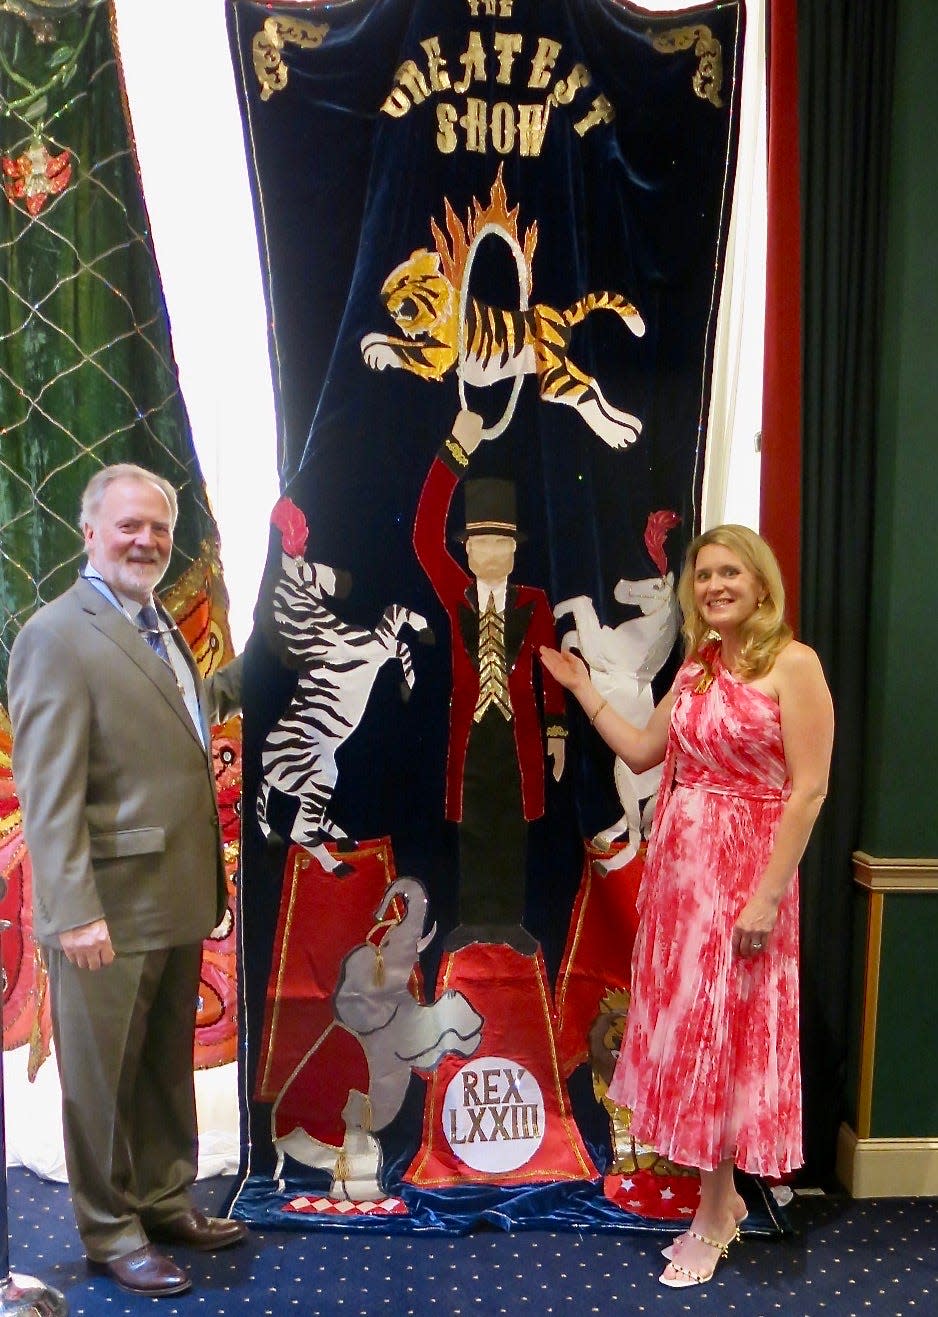 Mark Pollard Sealy, who was Rex LXXIII, and Lila Knicely, who was co-chair during Sealy's reign, pose with the train that Rex LXIII wore during the ball that year.